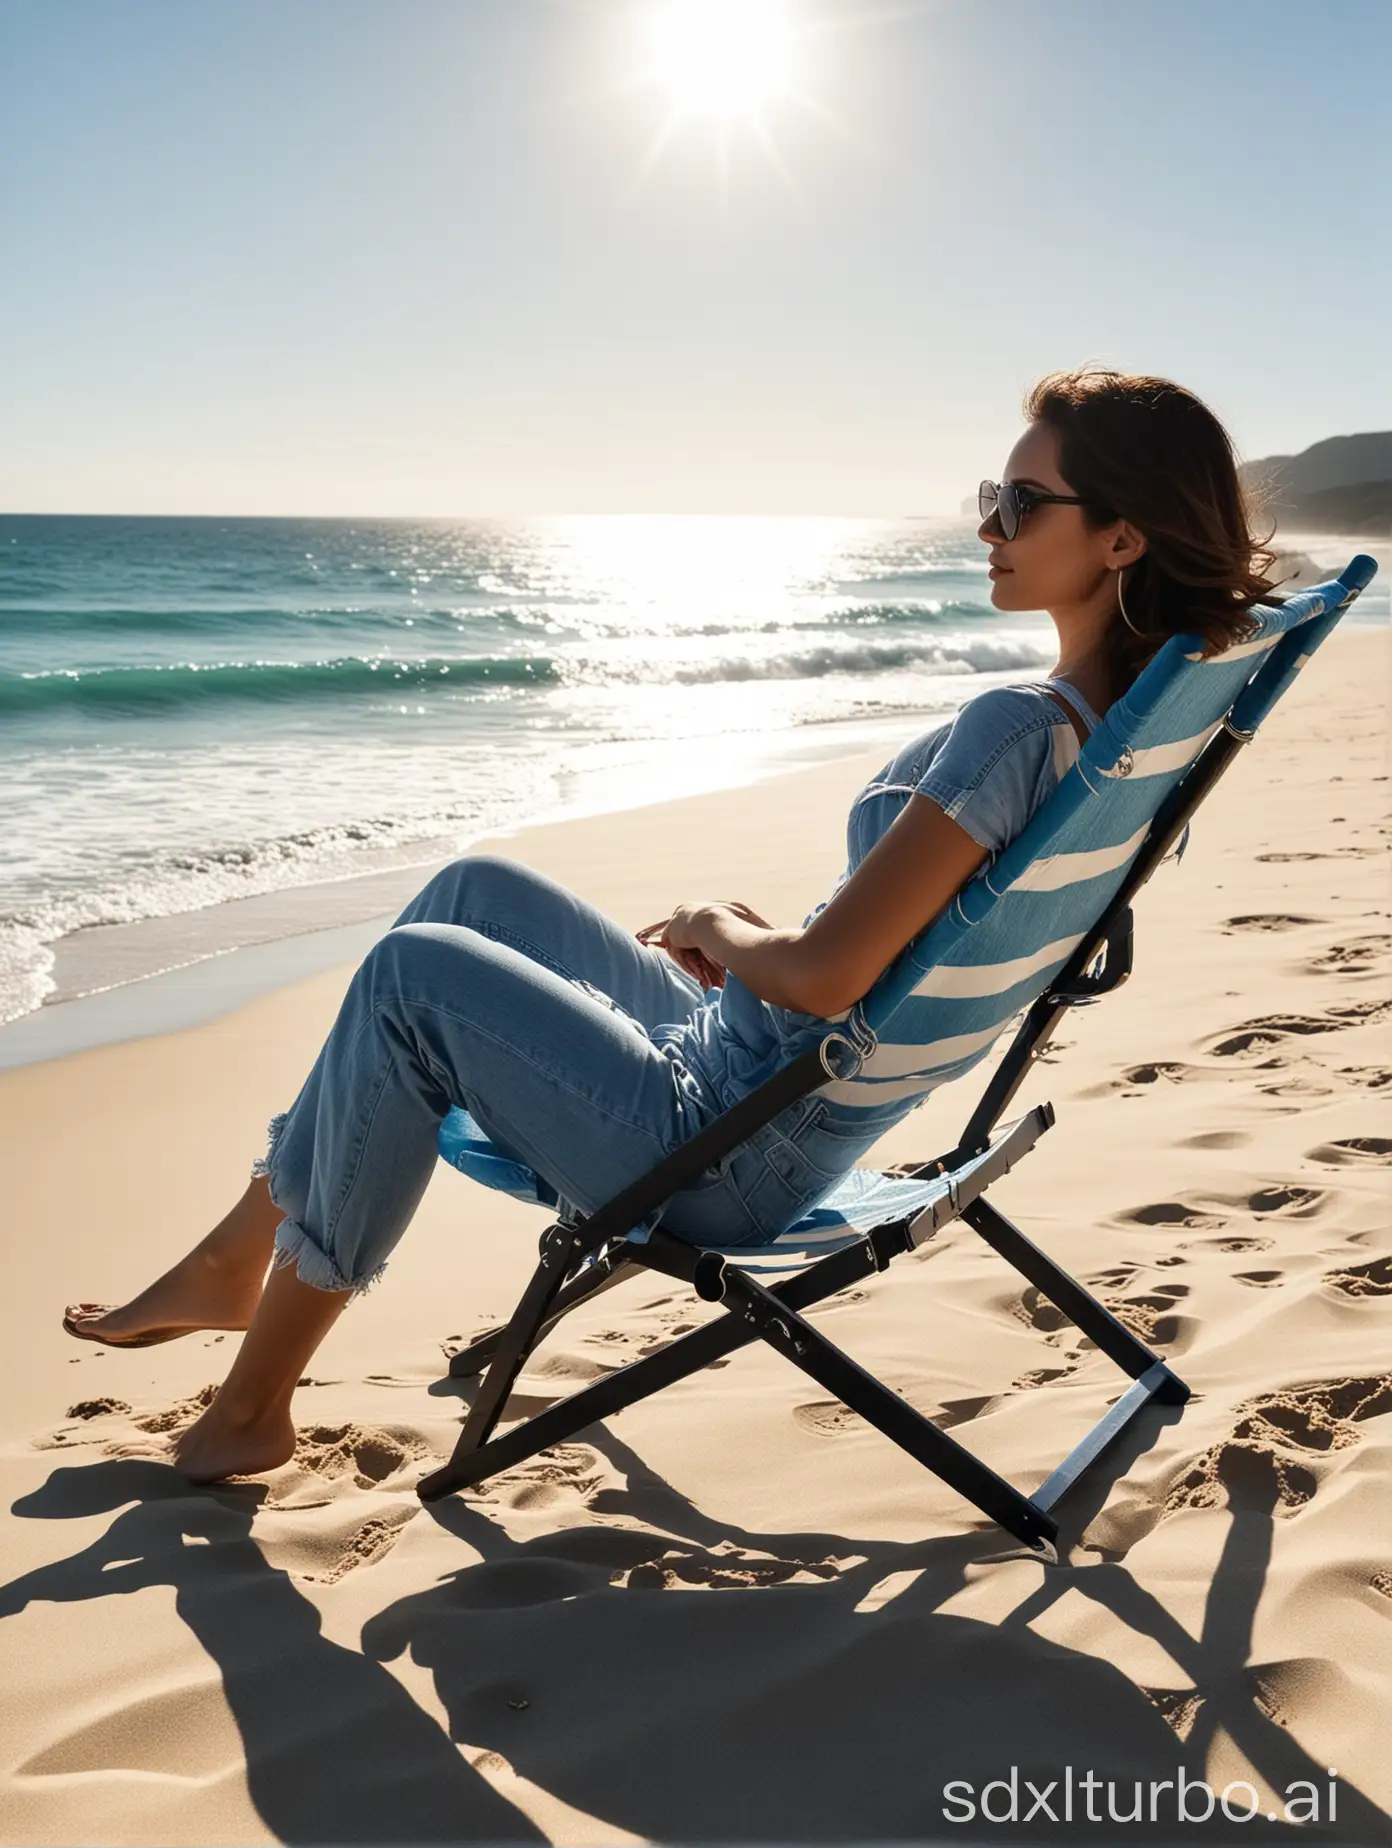 The beach chair is pure blue, not blue and white alternating. The chair is facing away from us. The frame of the beach chair is black. A beautiful woman is sitting on the chair, wearing sunglasses. In the background, there is the ocean and sunlight.